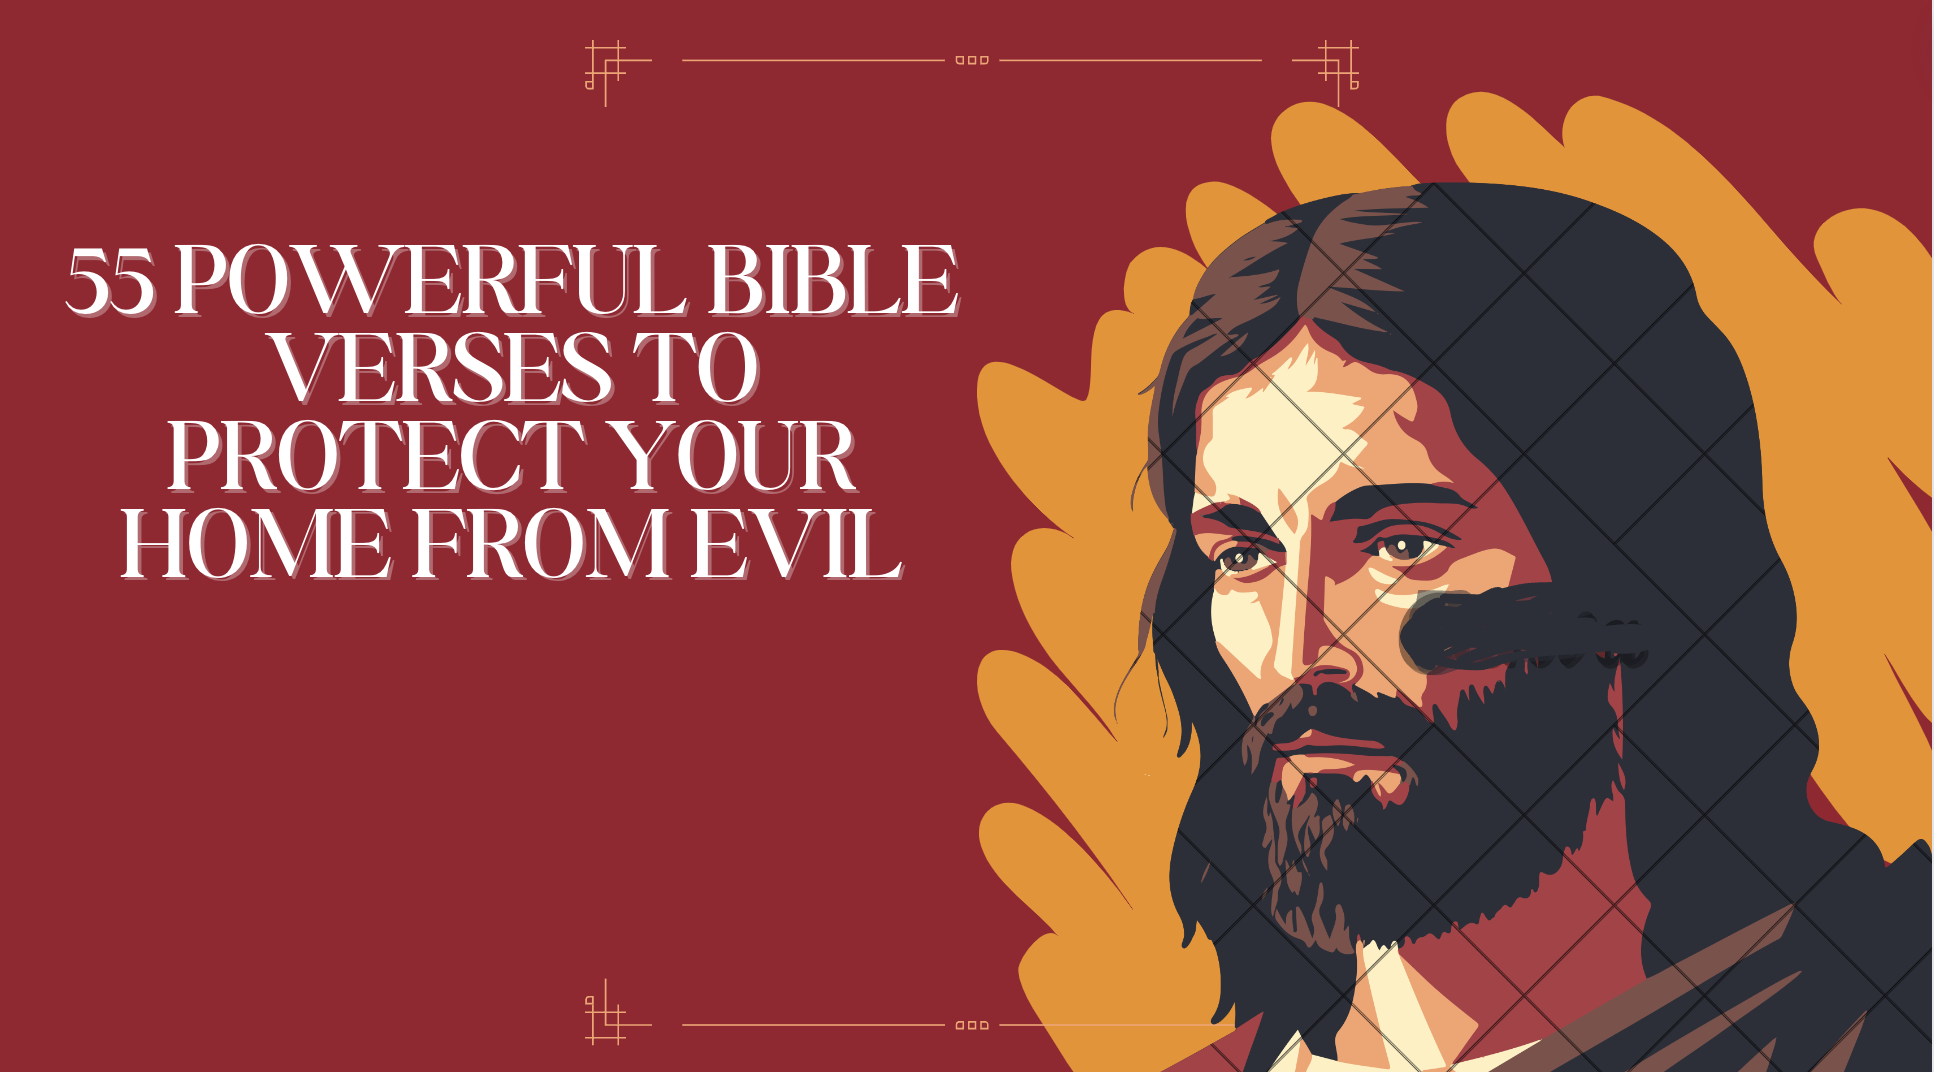 55 Powerful Bible Verses to Protect Your Home from Evil